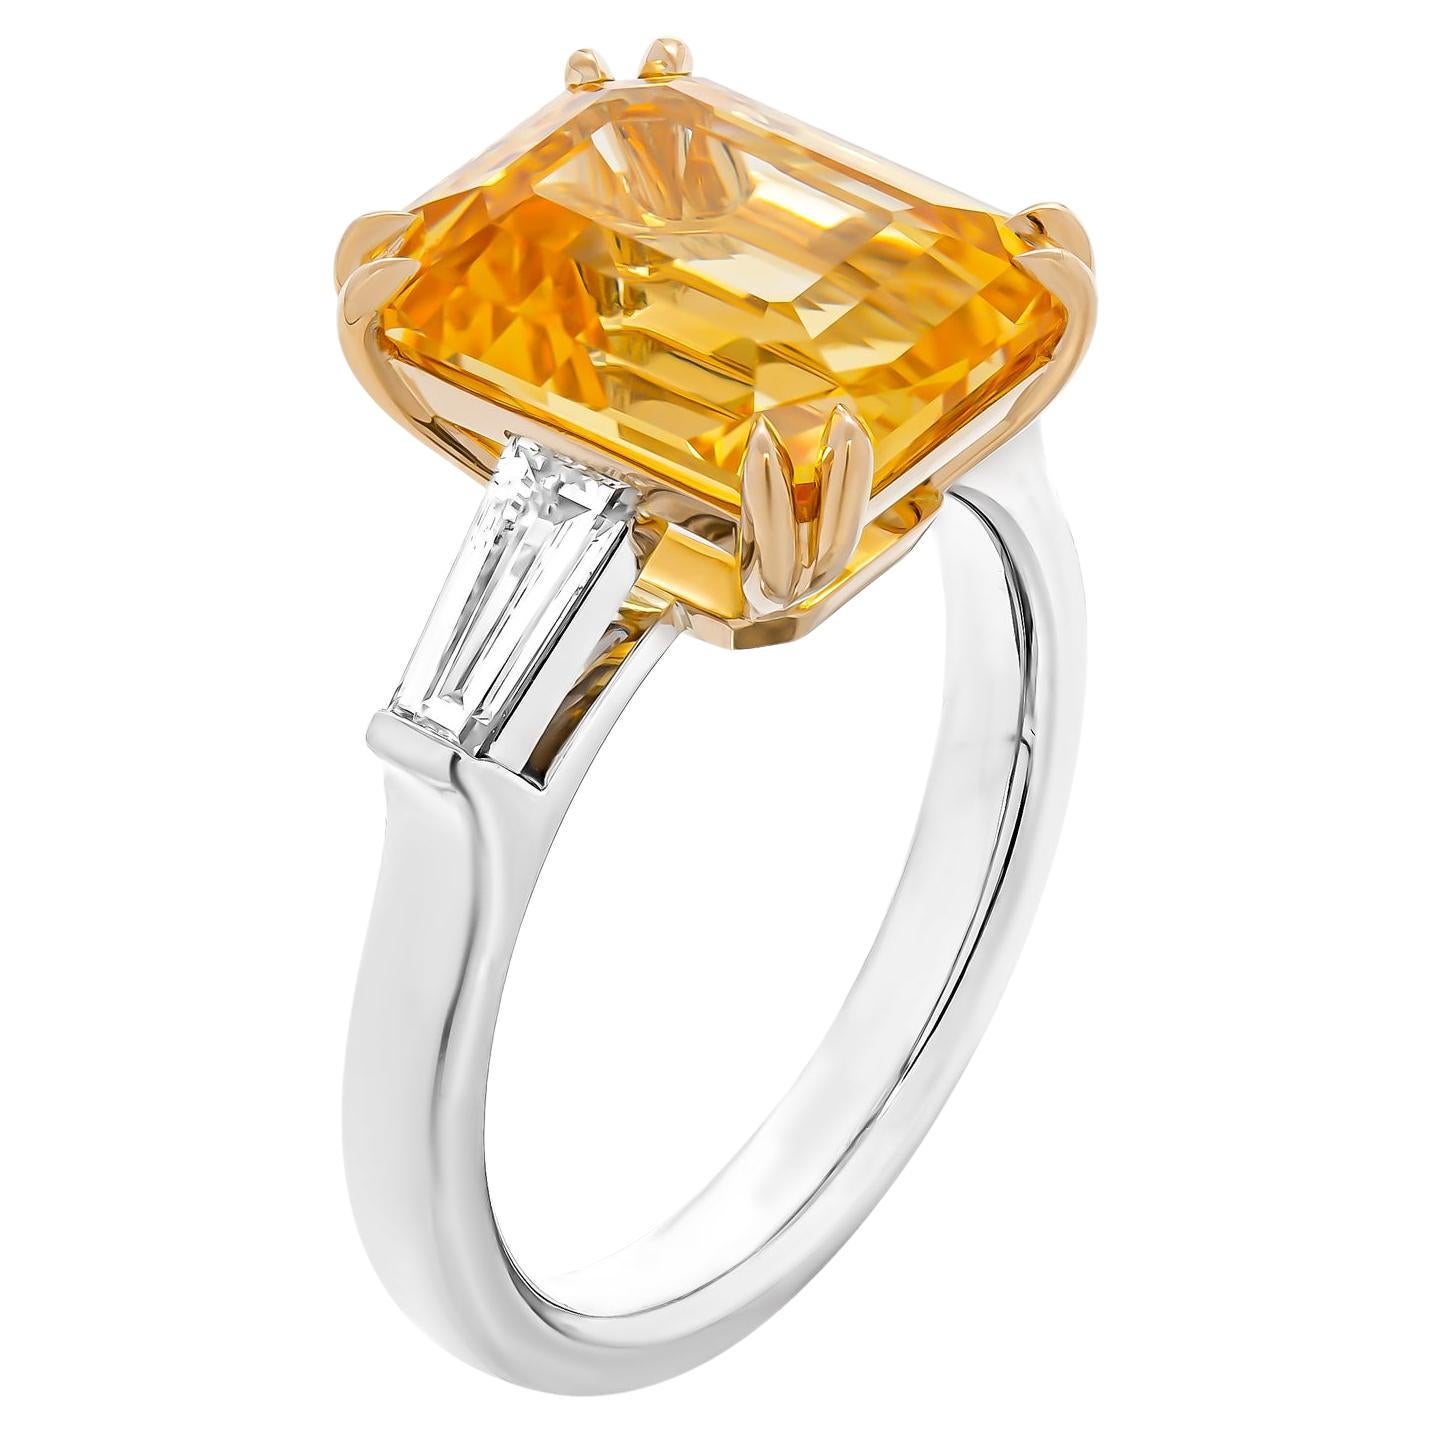 Certified 3 Stone Ring with 7.04ct Vivid Yellow Emerald Cut Sapphire For Sale